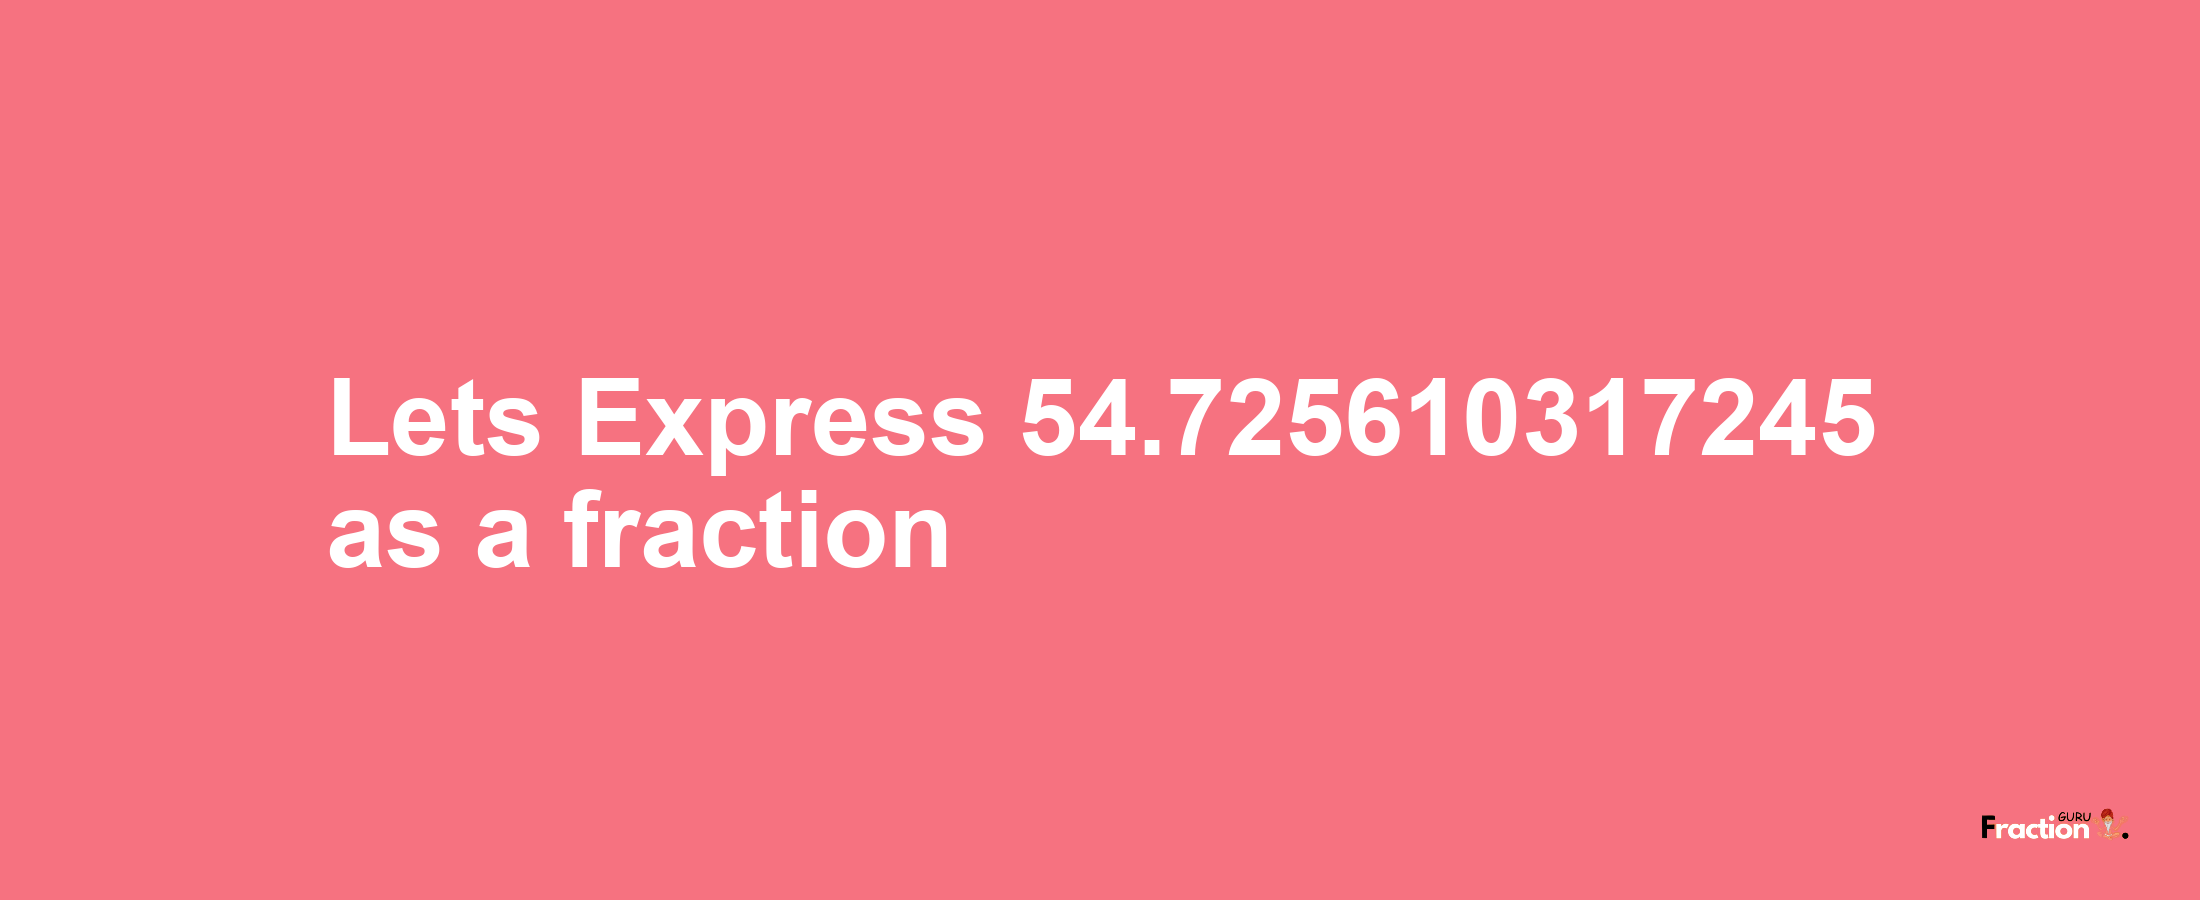 Lets Express 54.725610317245 as afraction